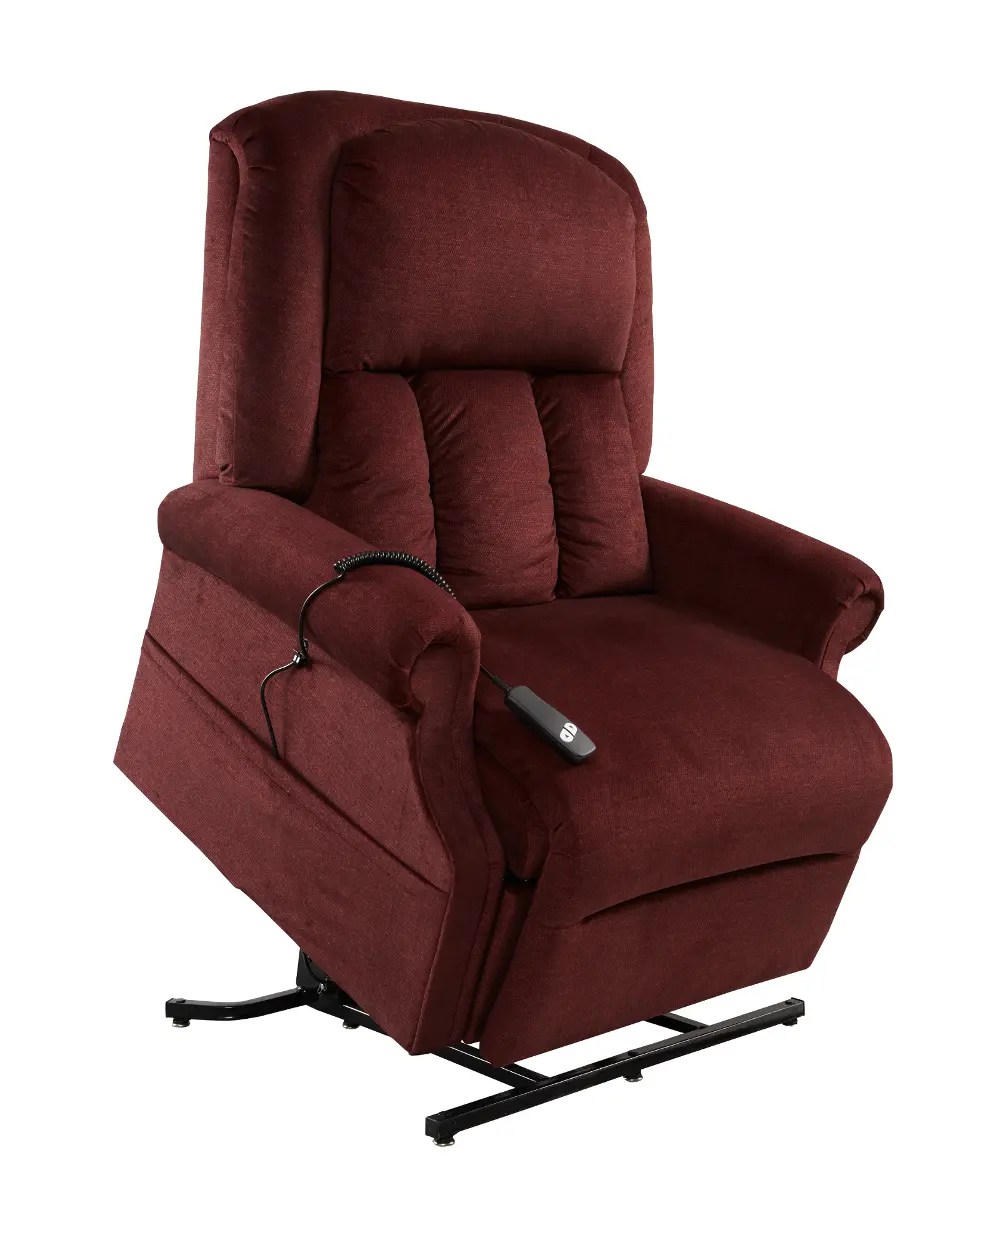 Bordeaux Red Reclining Lift Chair-1